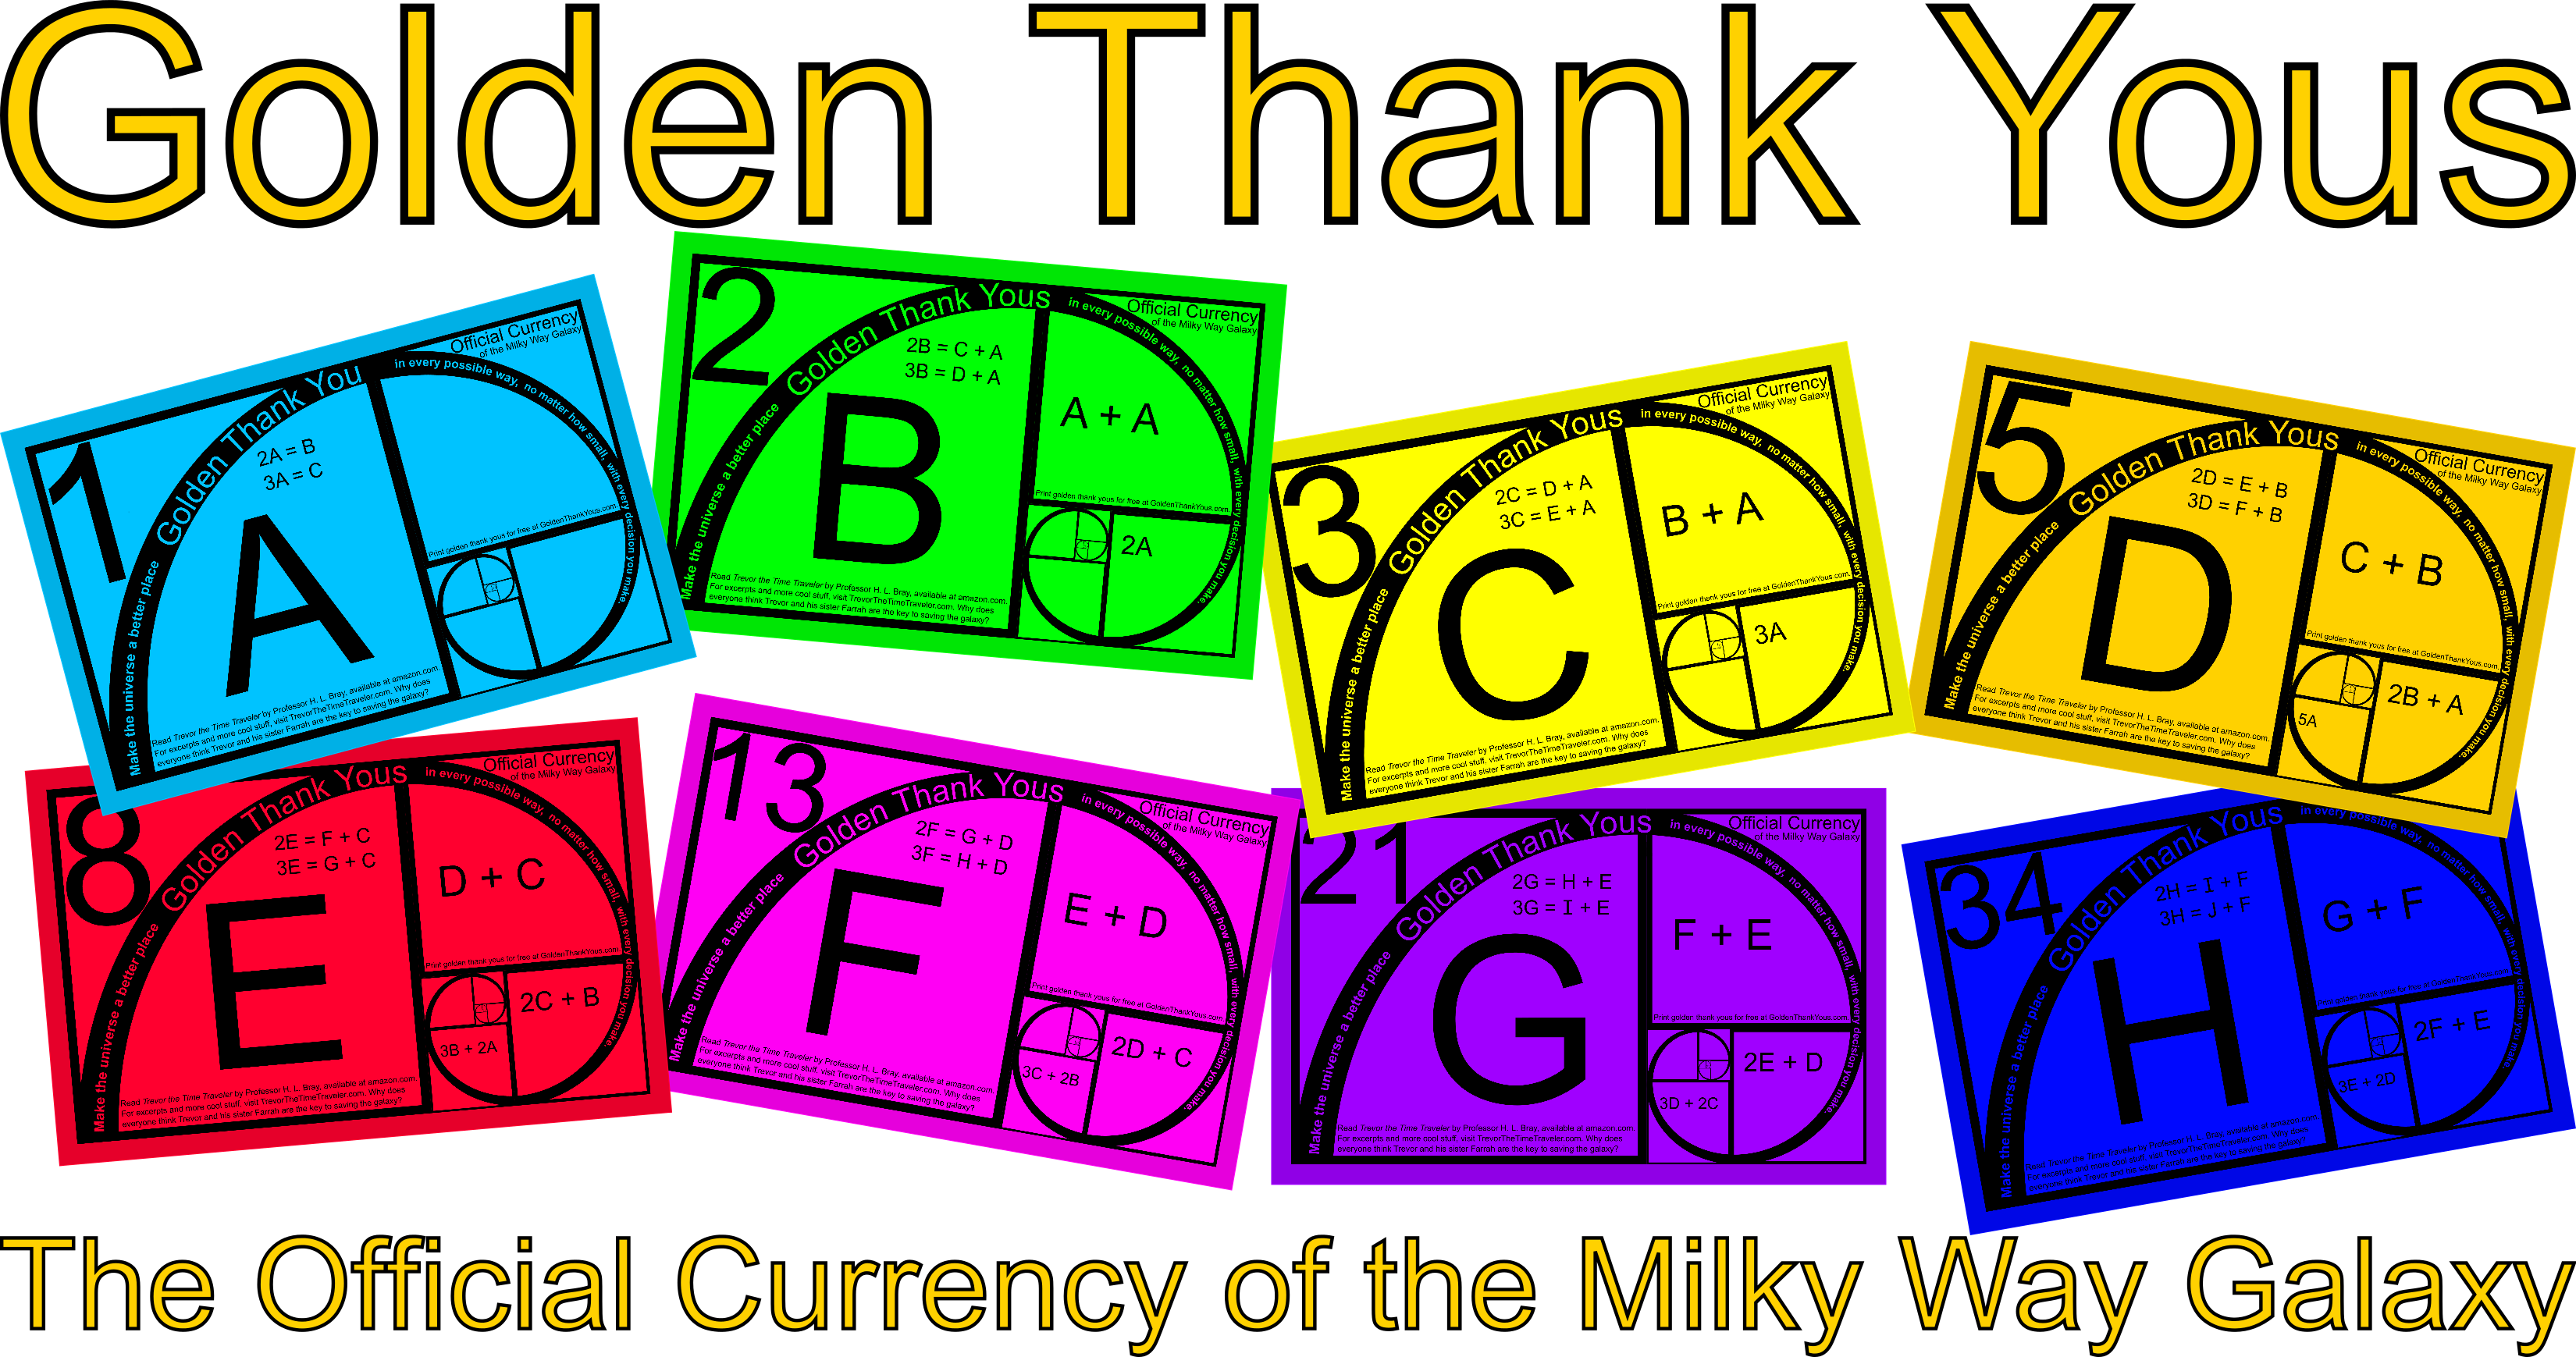 Golden Thank Yous: The Official Currency of the Milky Way Galaxy